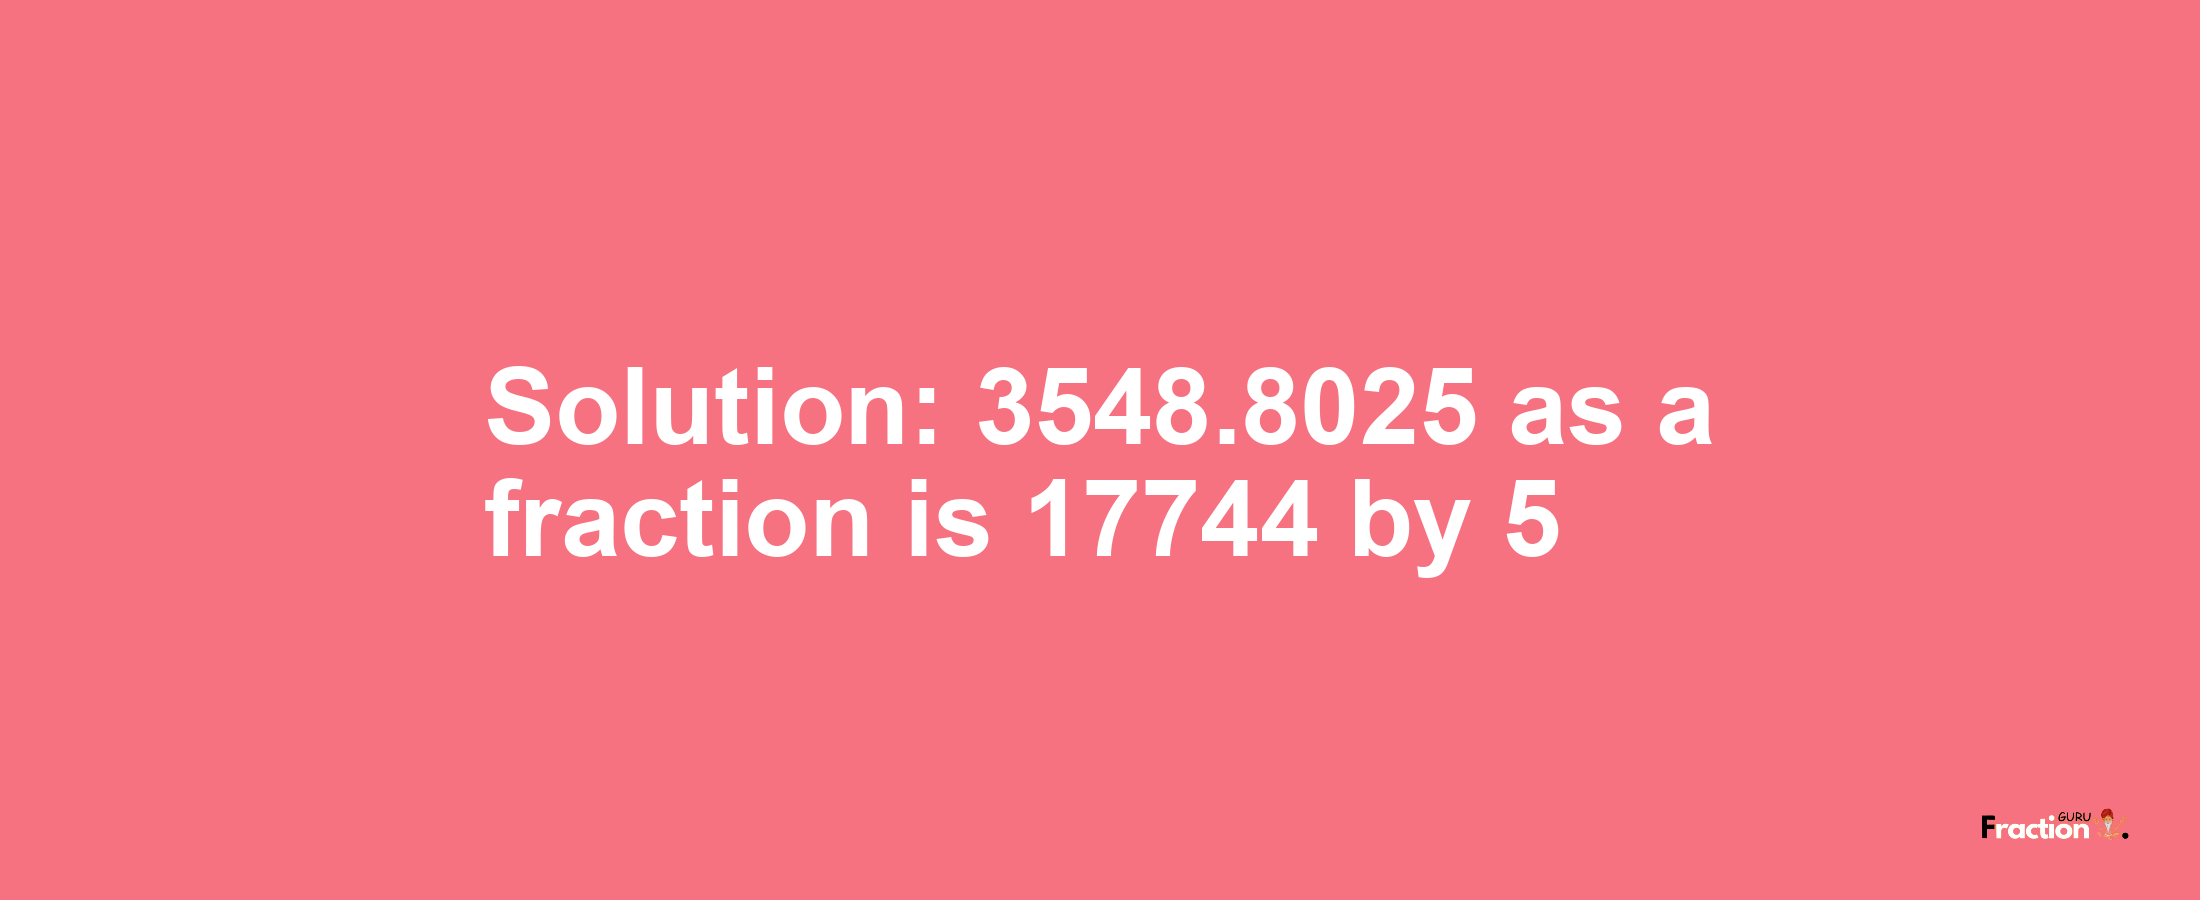 Solution:3548.8025 as a fraction is 17744/5